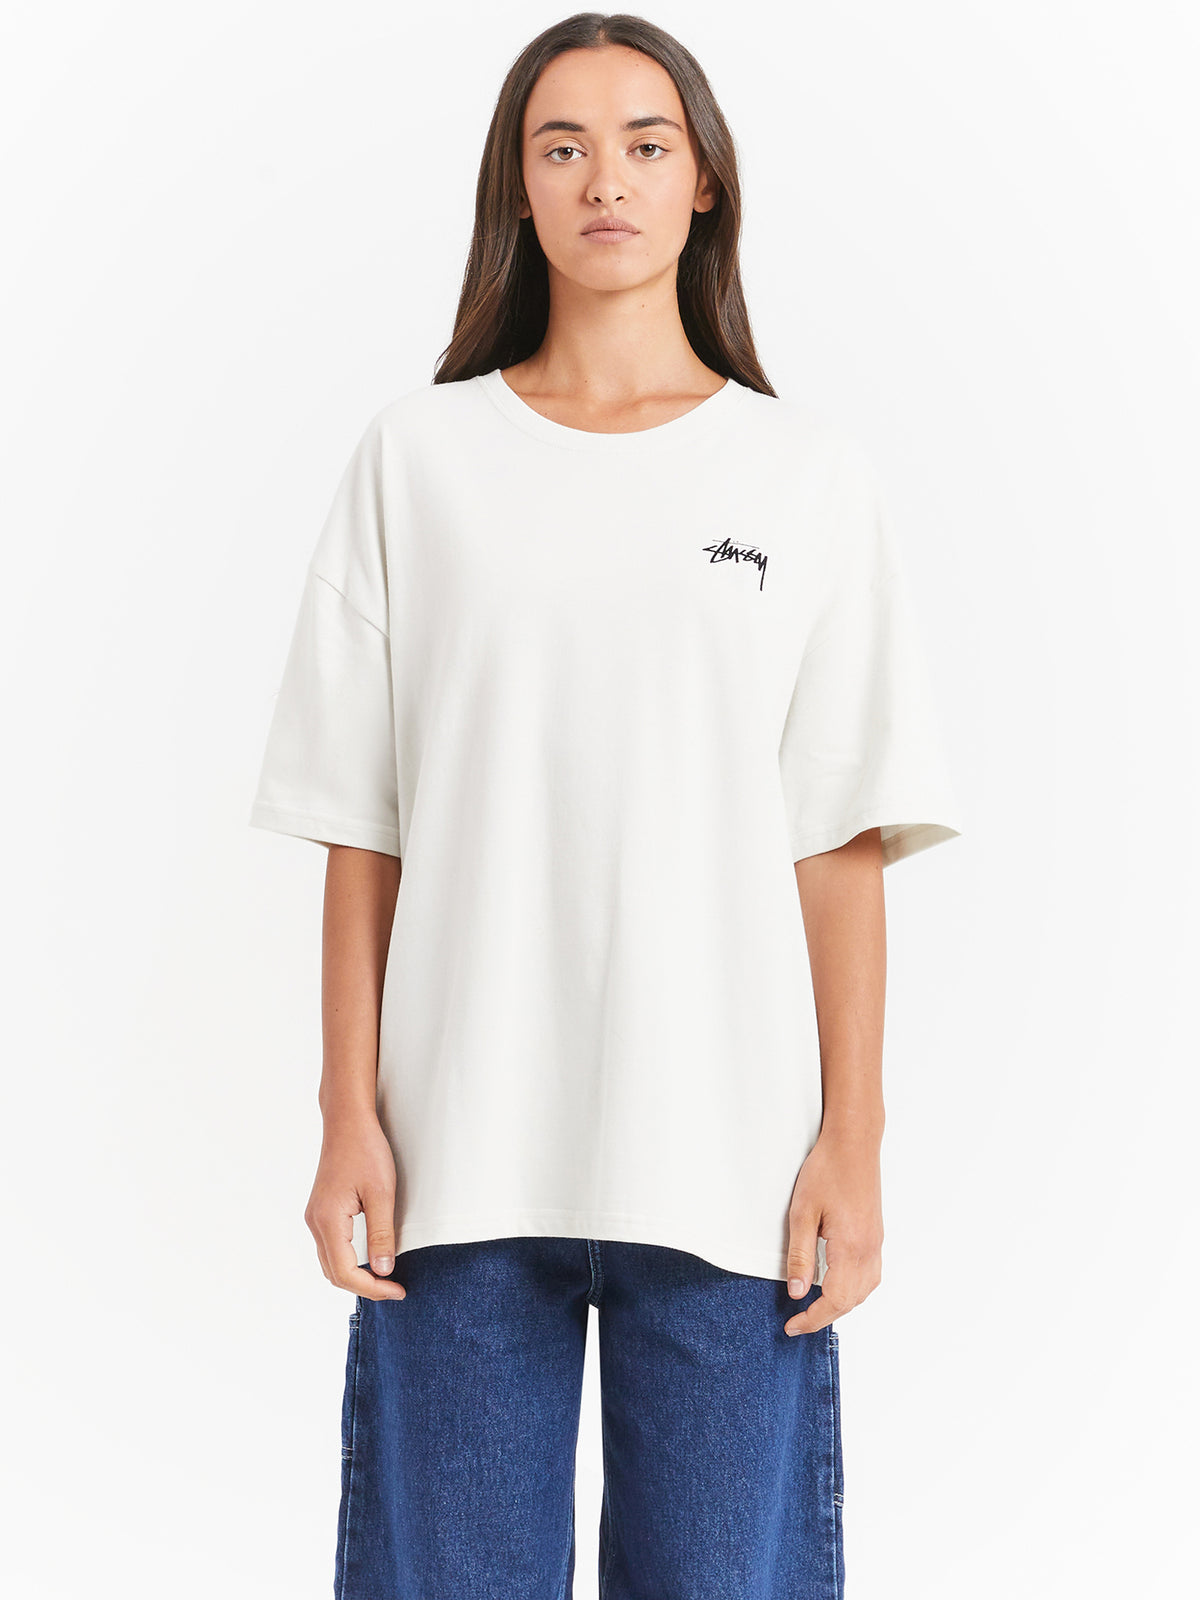 Pair Of Dice Heavyweight Relaxed T-Shirt in Winter White